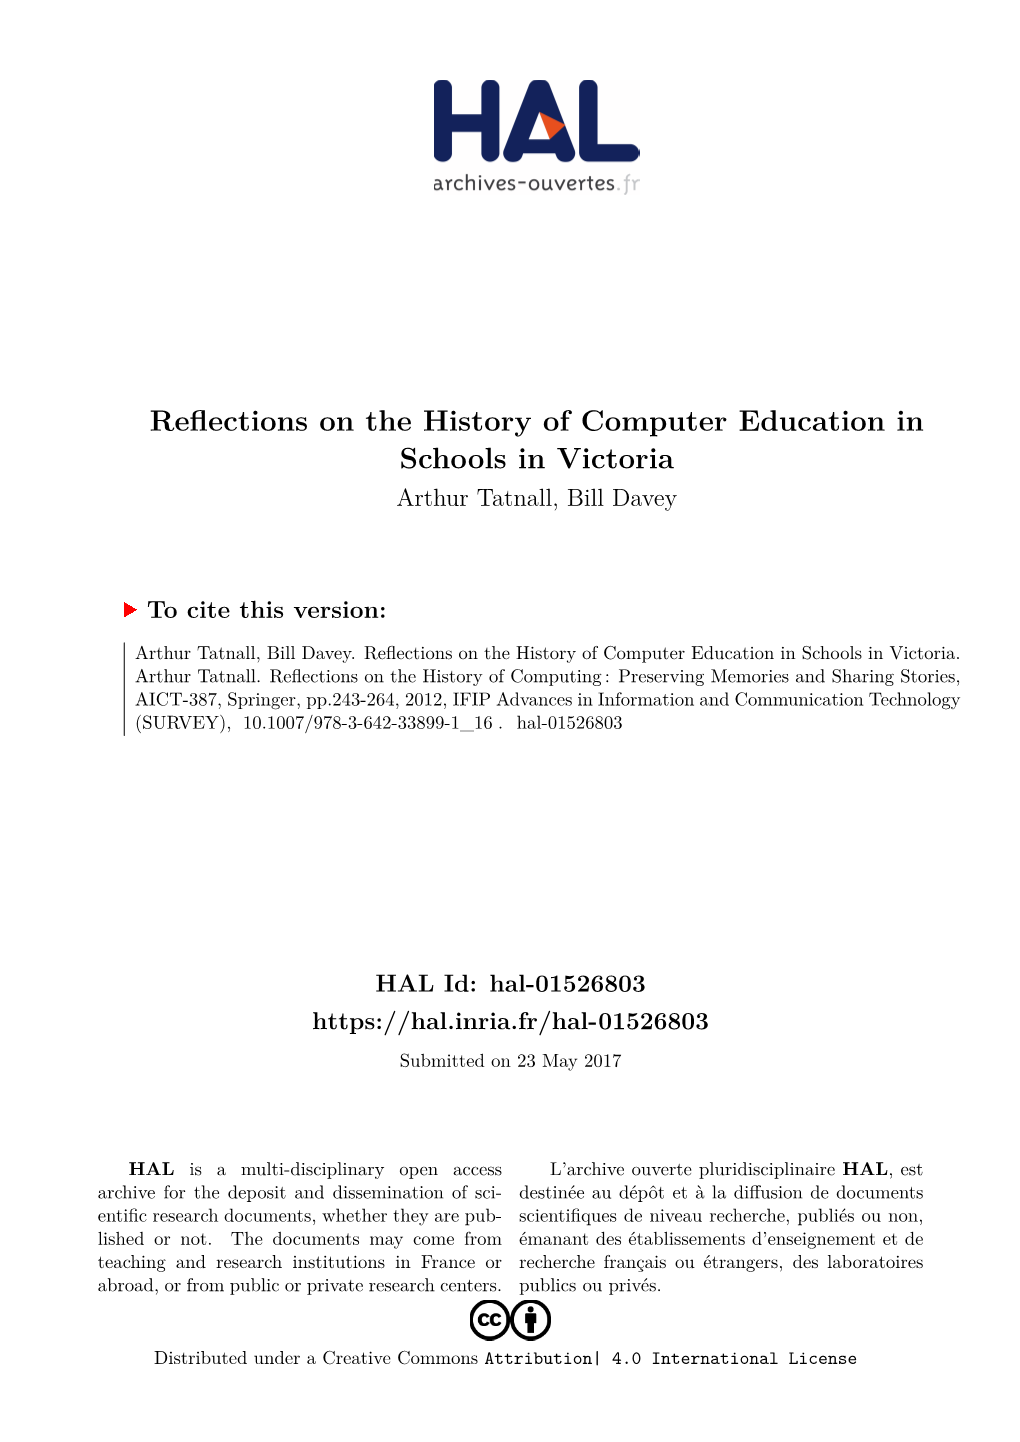 Reflections on the History of Computer Education in Schools in Victoria Arthur Tatnall, Bill Davey